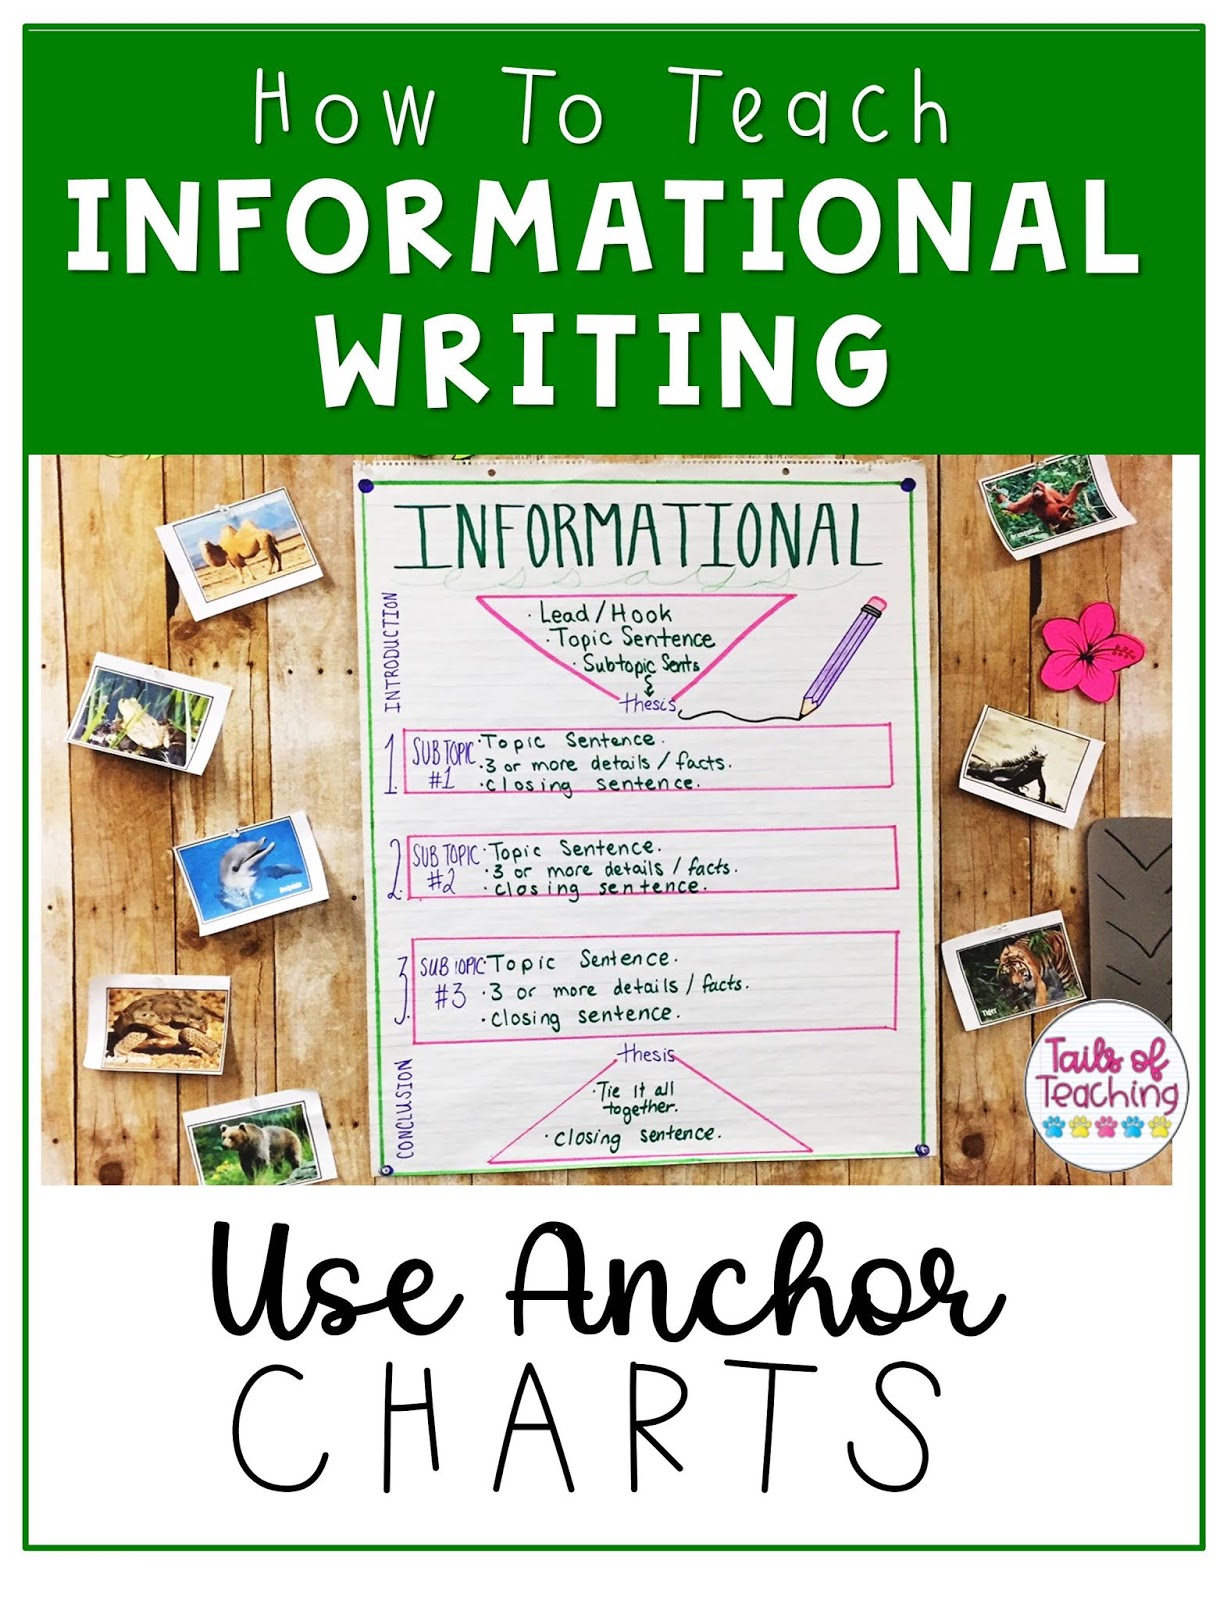 Tails of Teaching: How to Teach Informational Writing